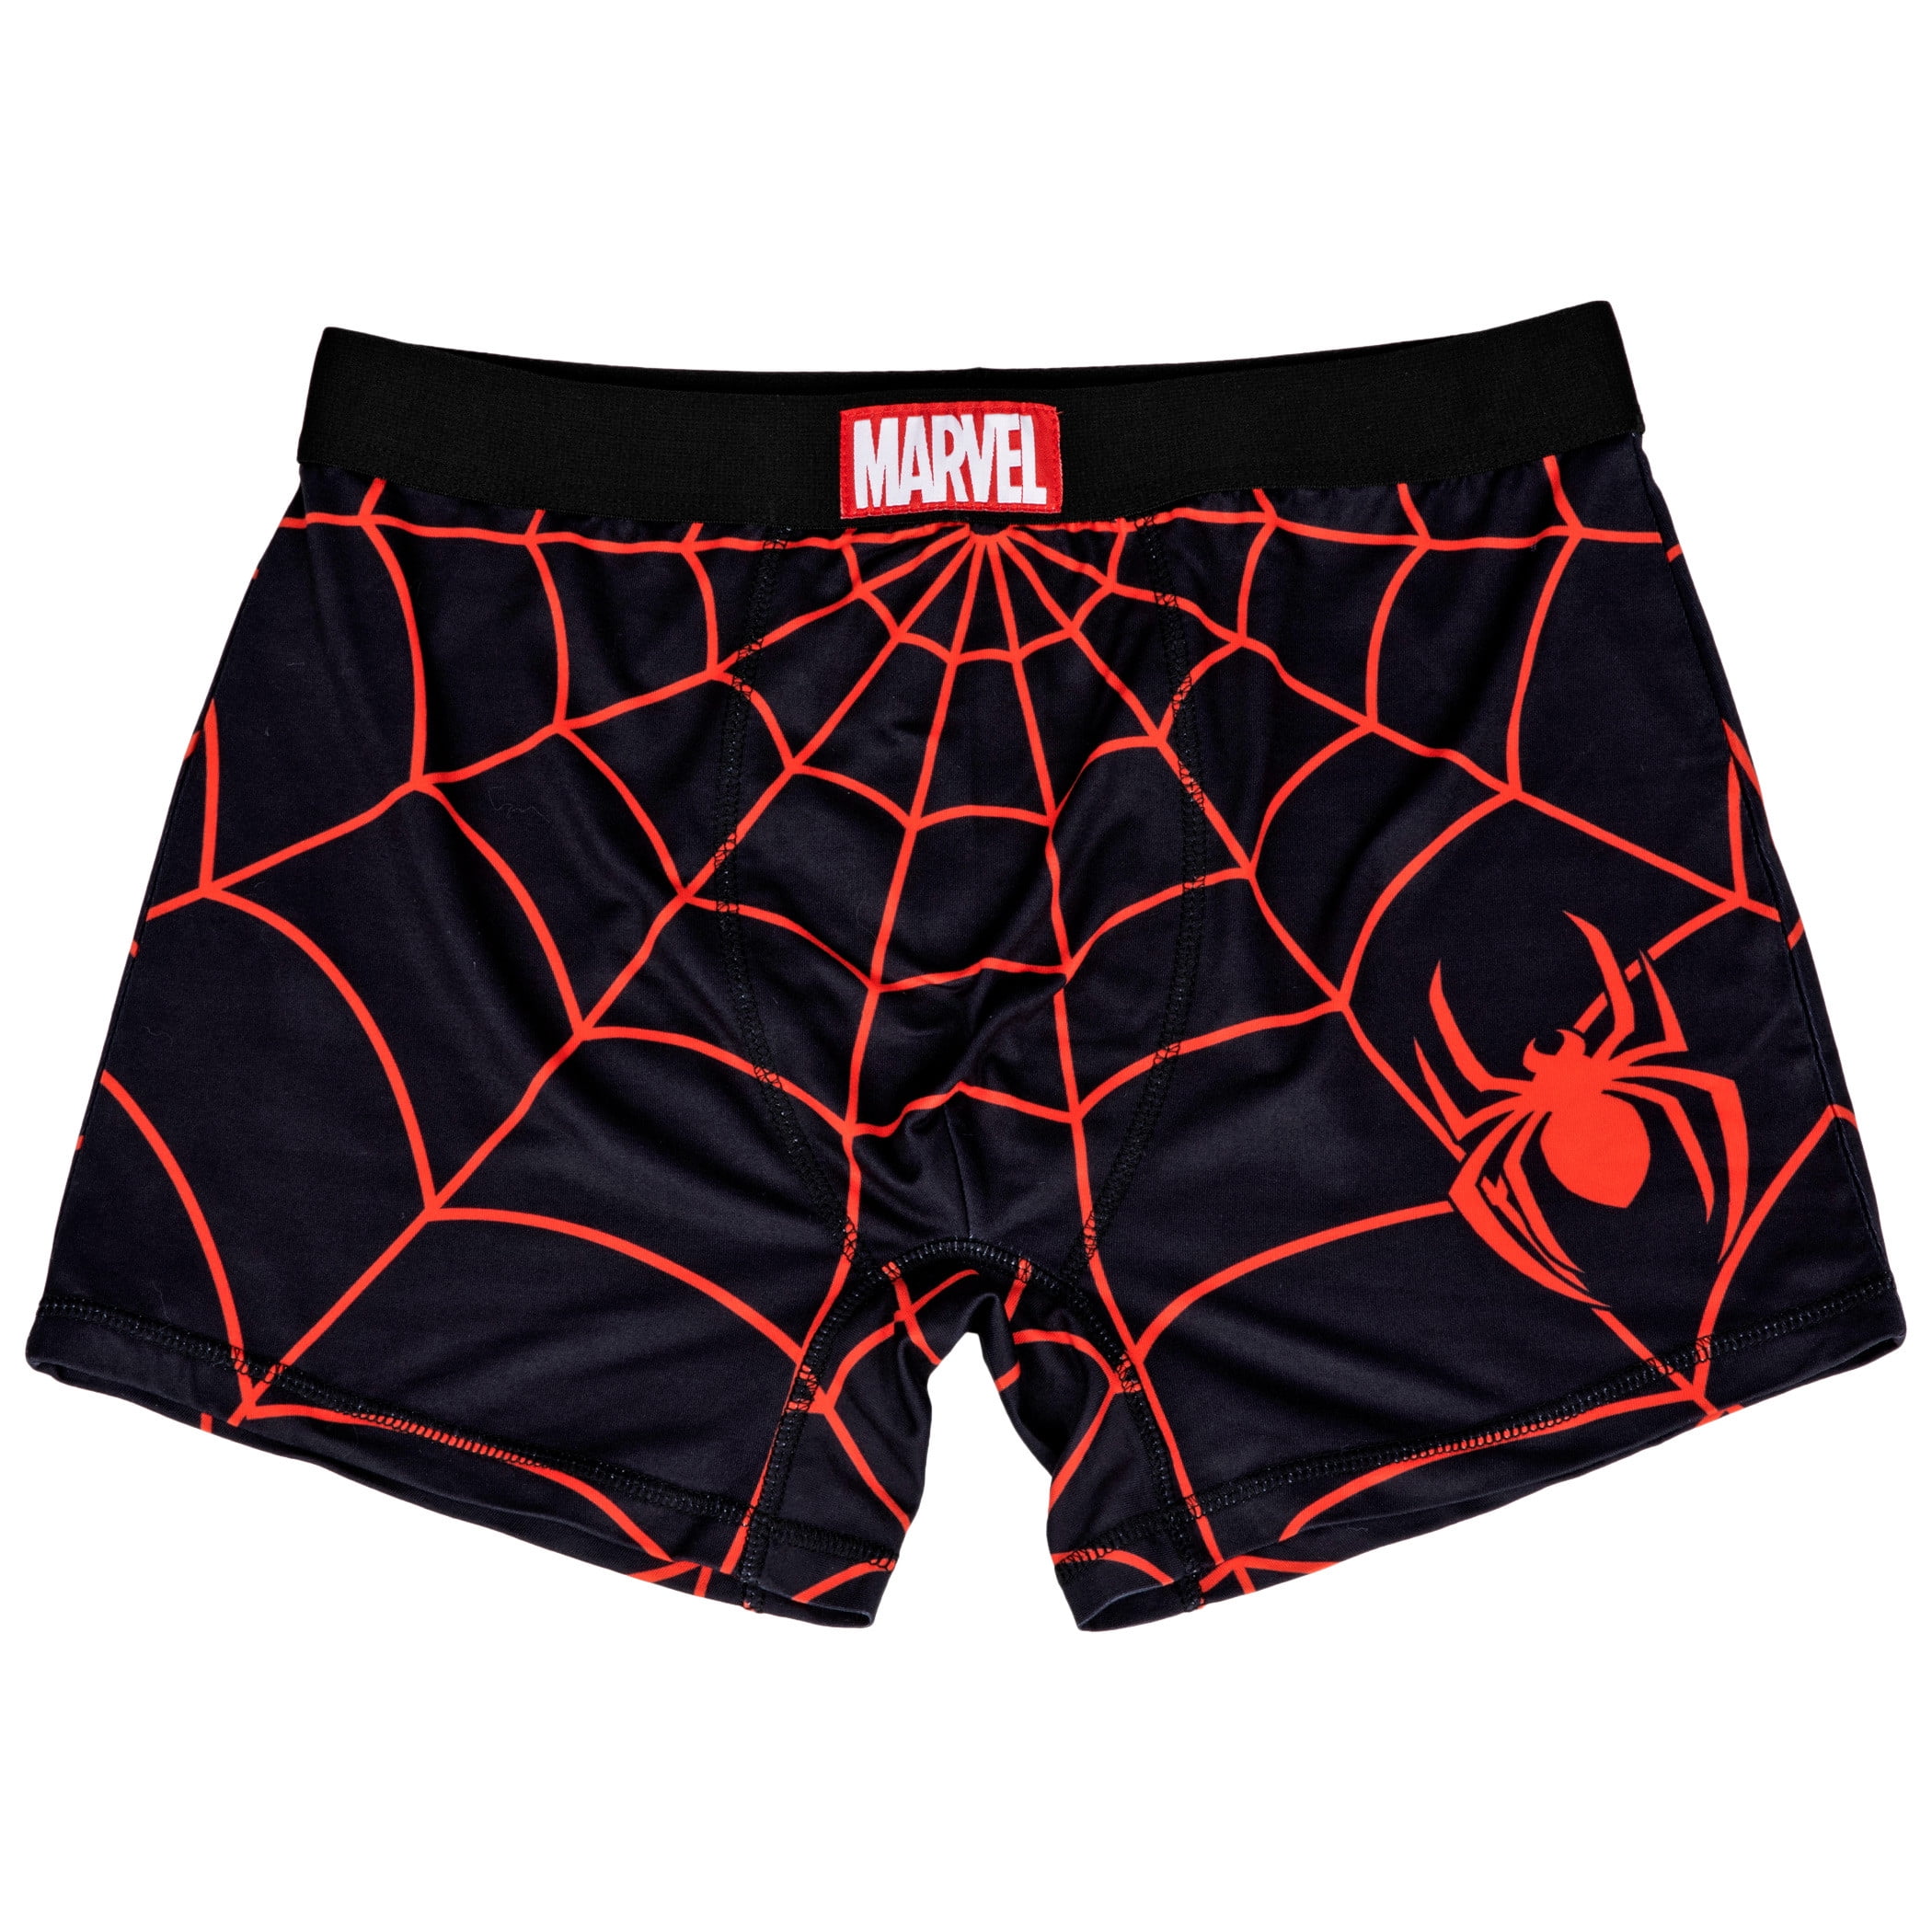 MARVEL COMICS SPIDERMAN SPIDEY FACE RED BOXER BRIEFS SIZE SMALL 